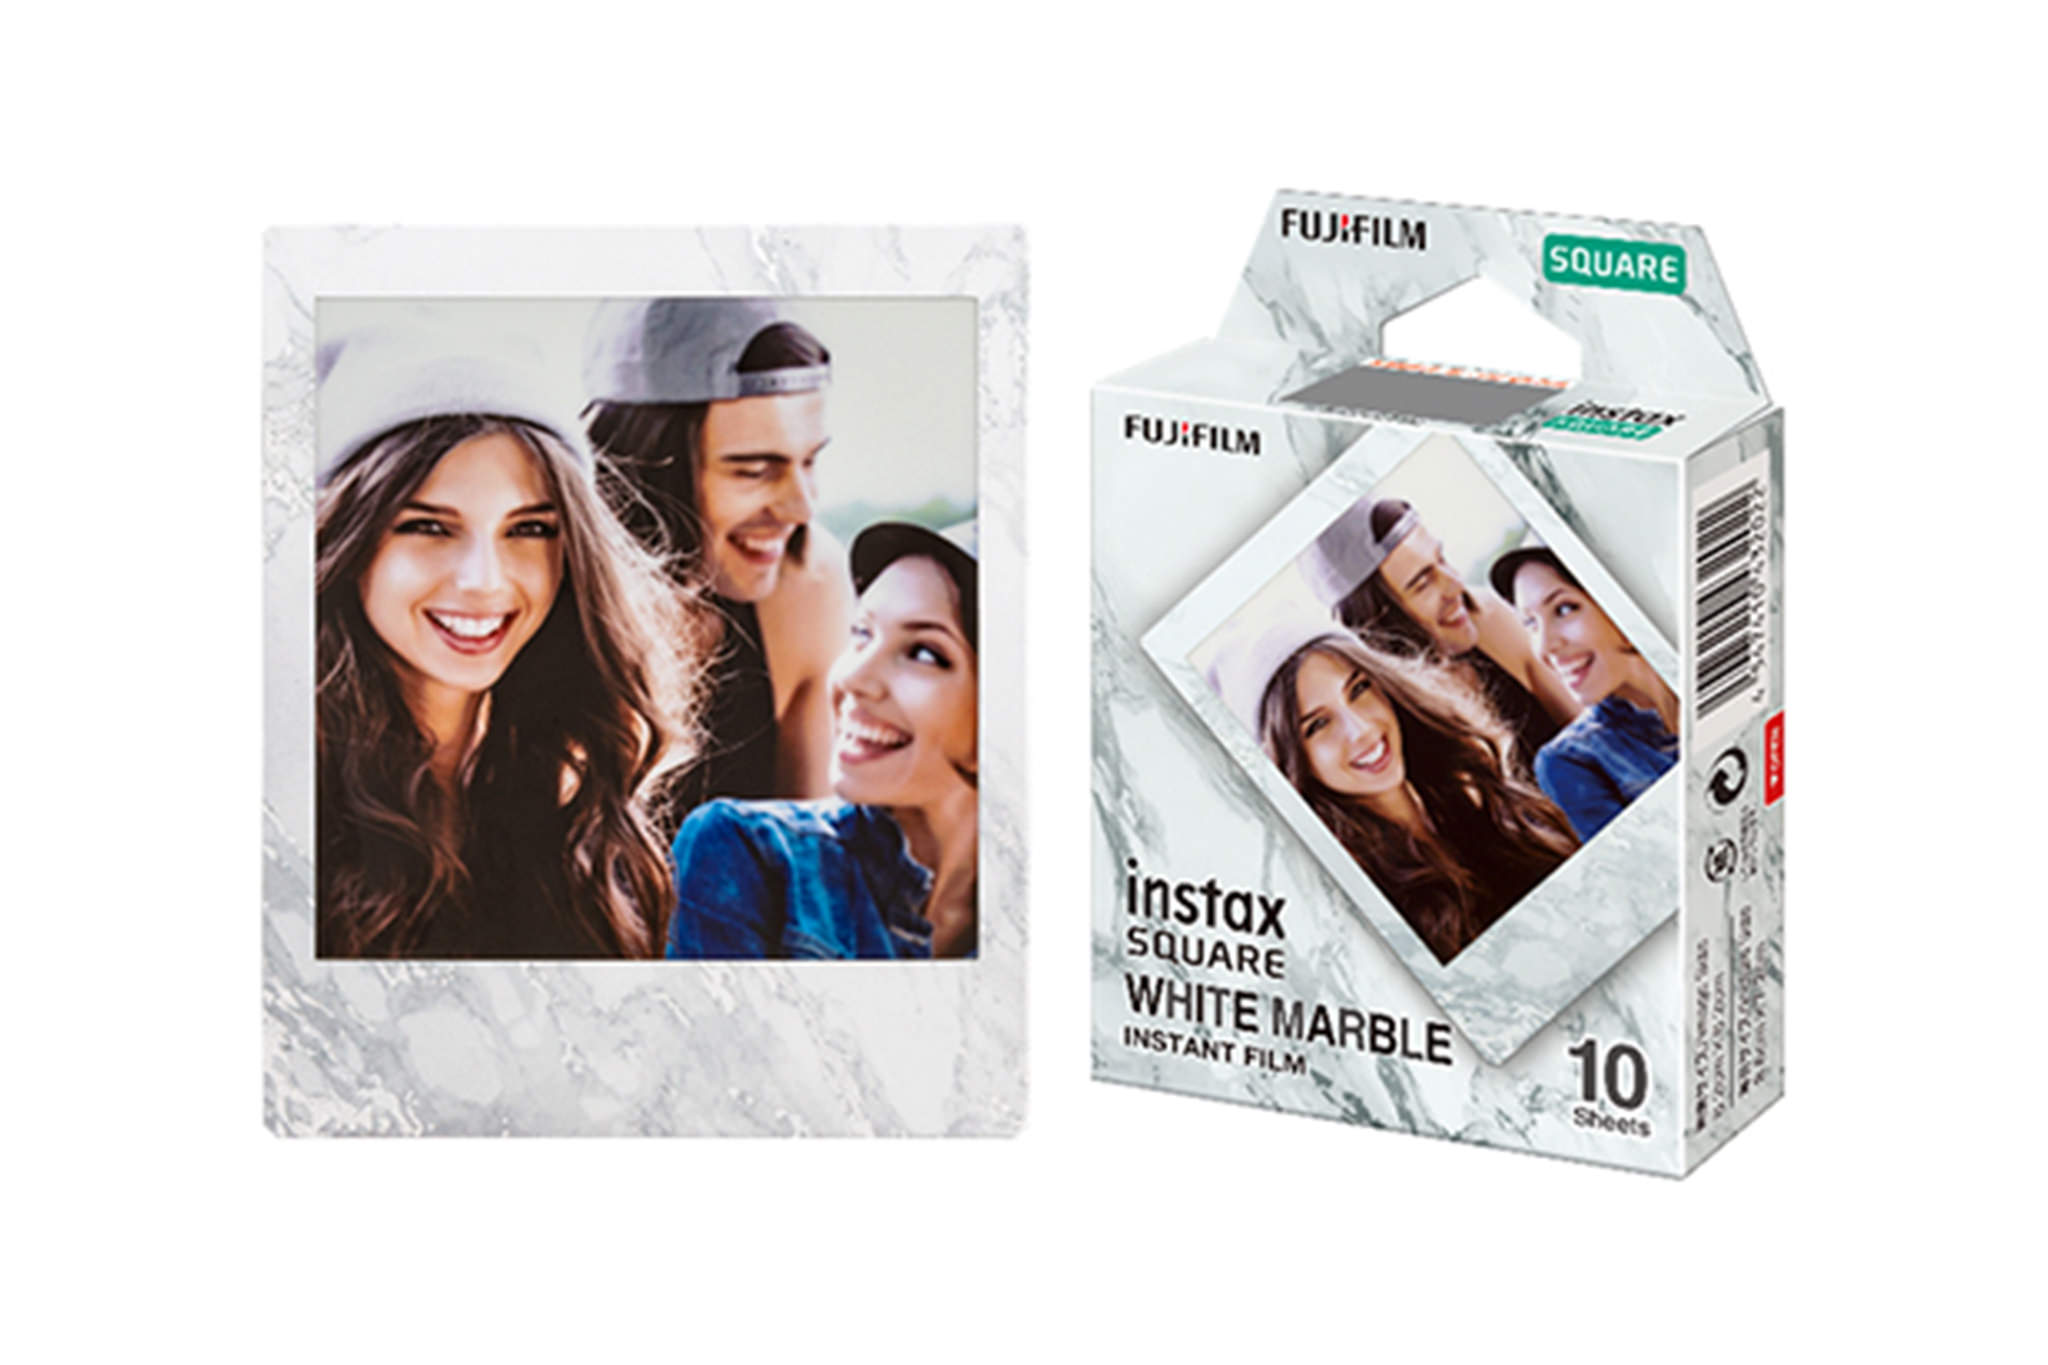 Fujifilm Instax Square White Marble - All important information